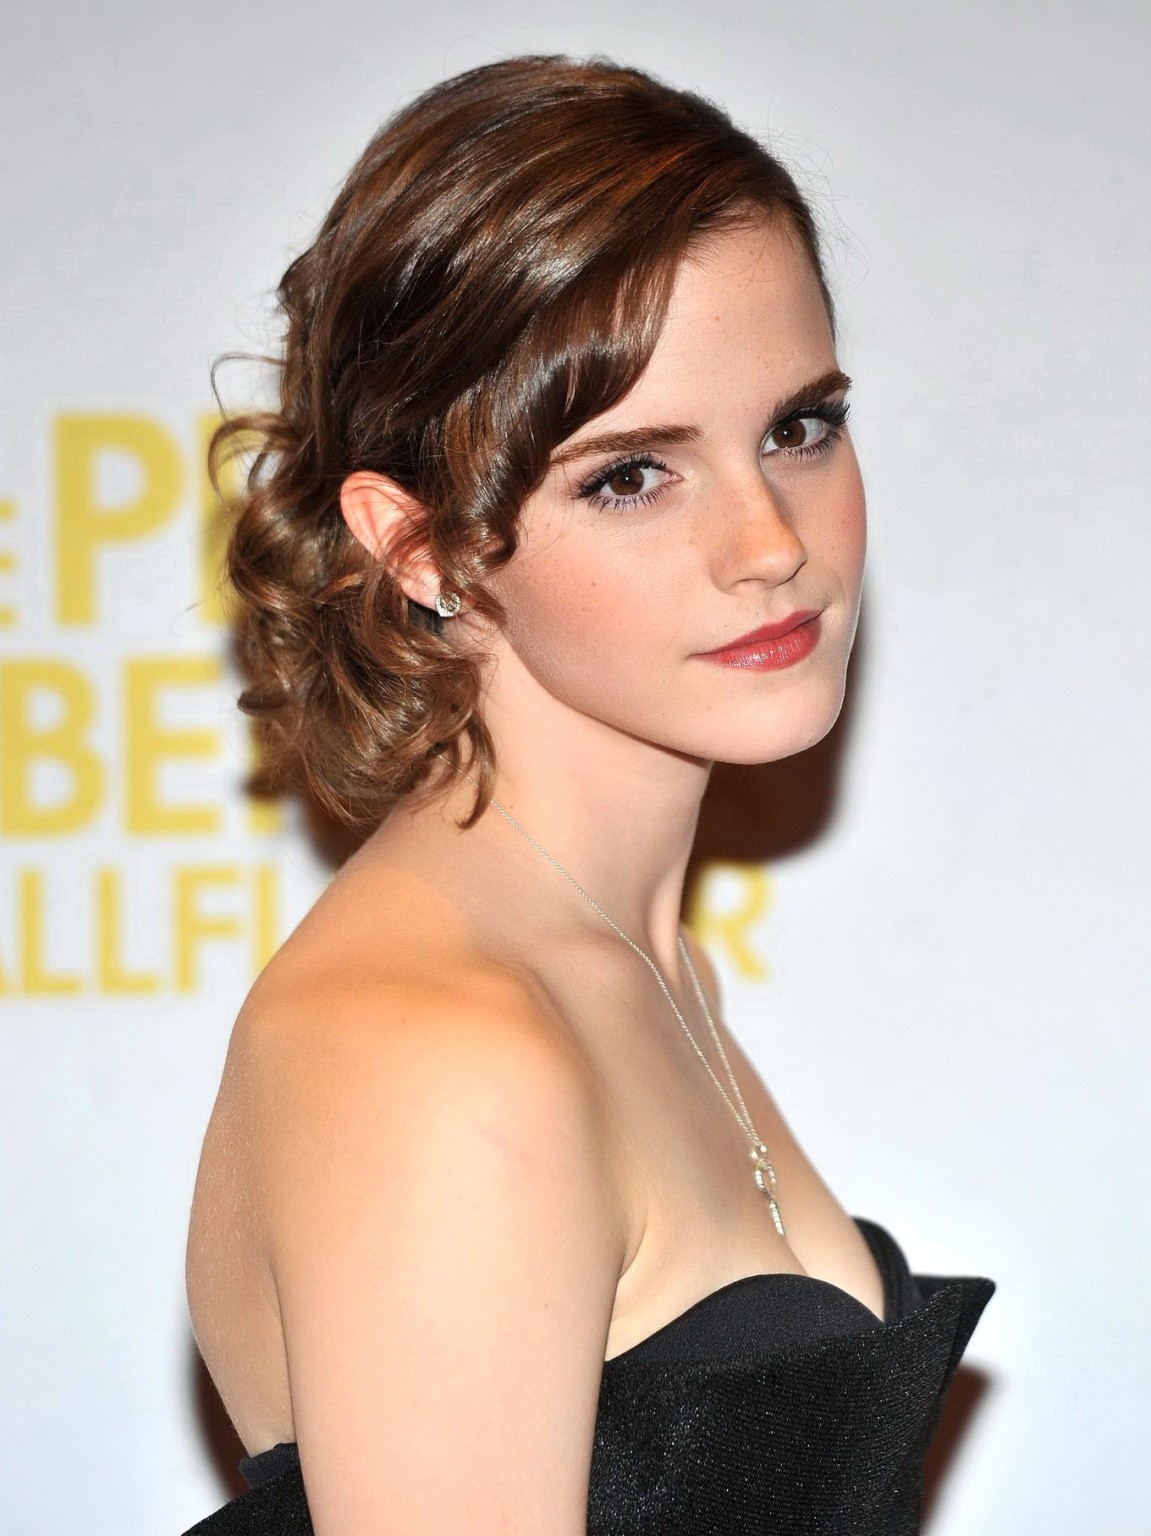 Emma Watson cleavy wearing a black strapless dress at ' Perks of Being a Wallflo #75251708